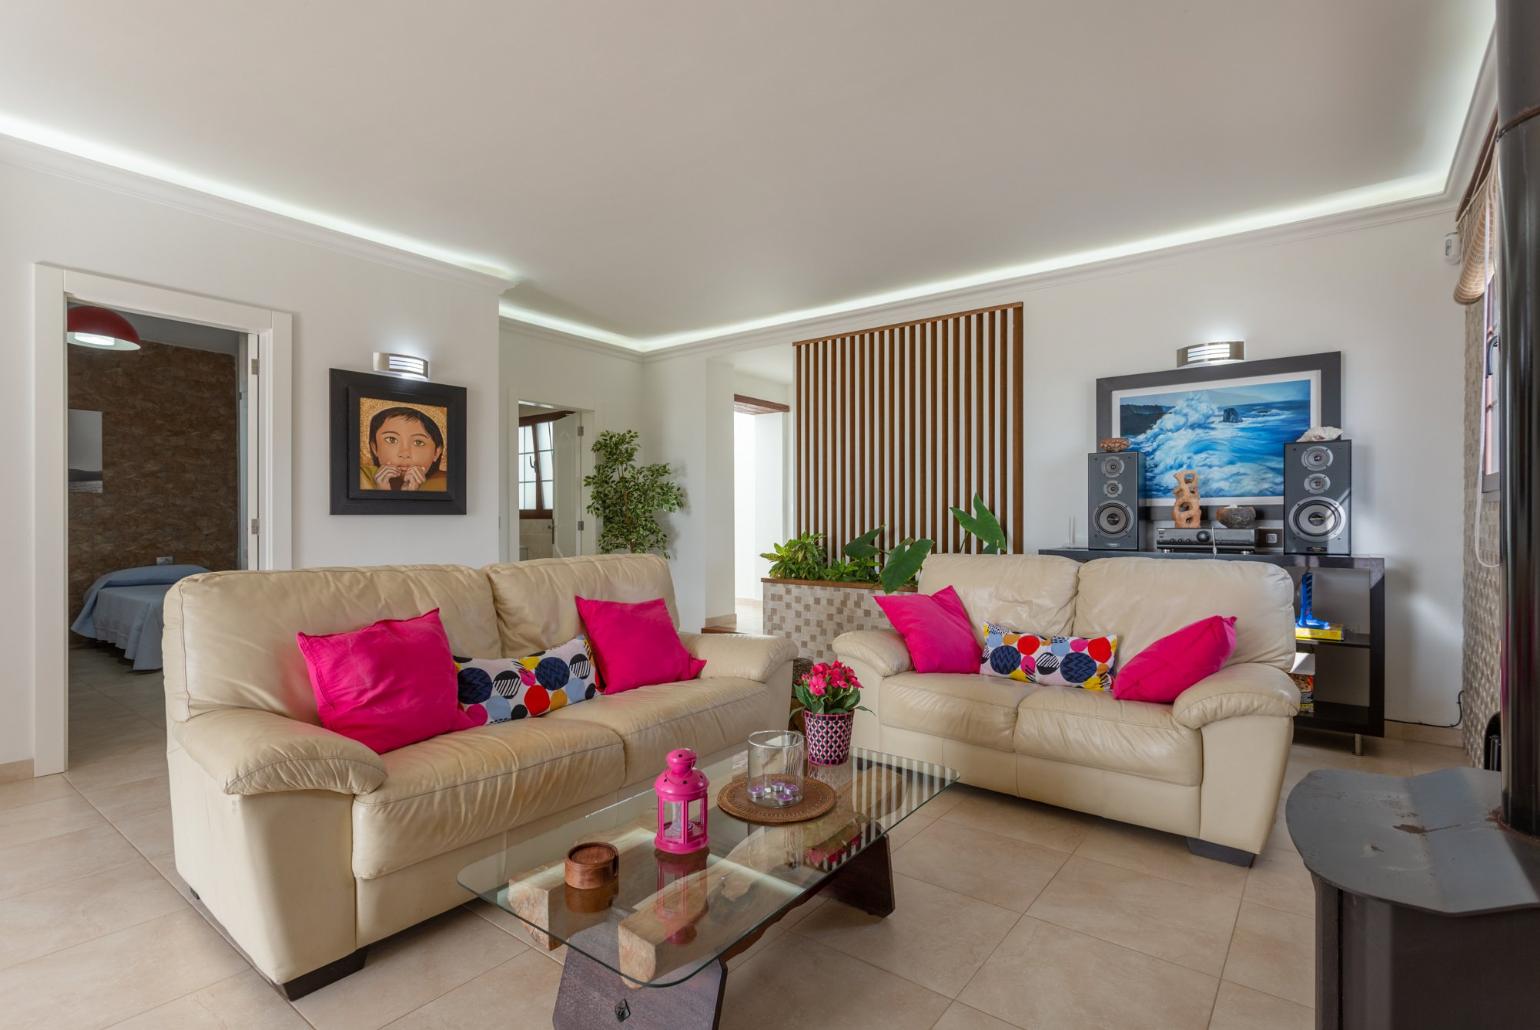 Open-plan living room with sofas, dining area, kitchen, ornamental fireplace, WiFi internet, satellite TV, DVD player, and pool terrace access